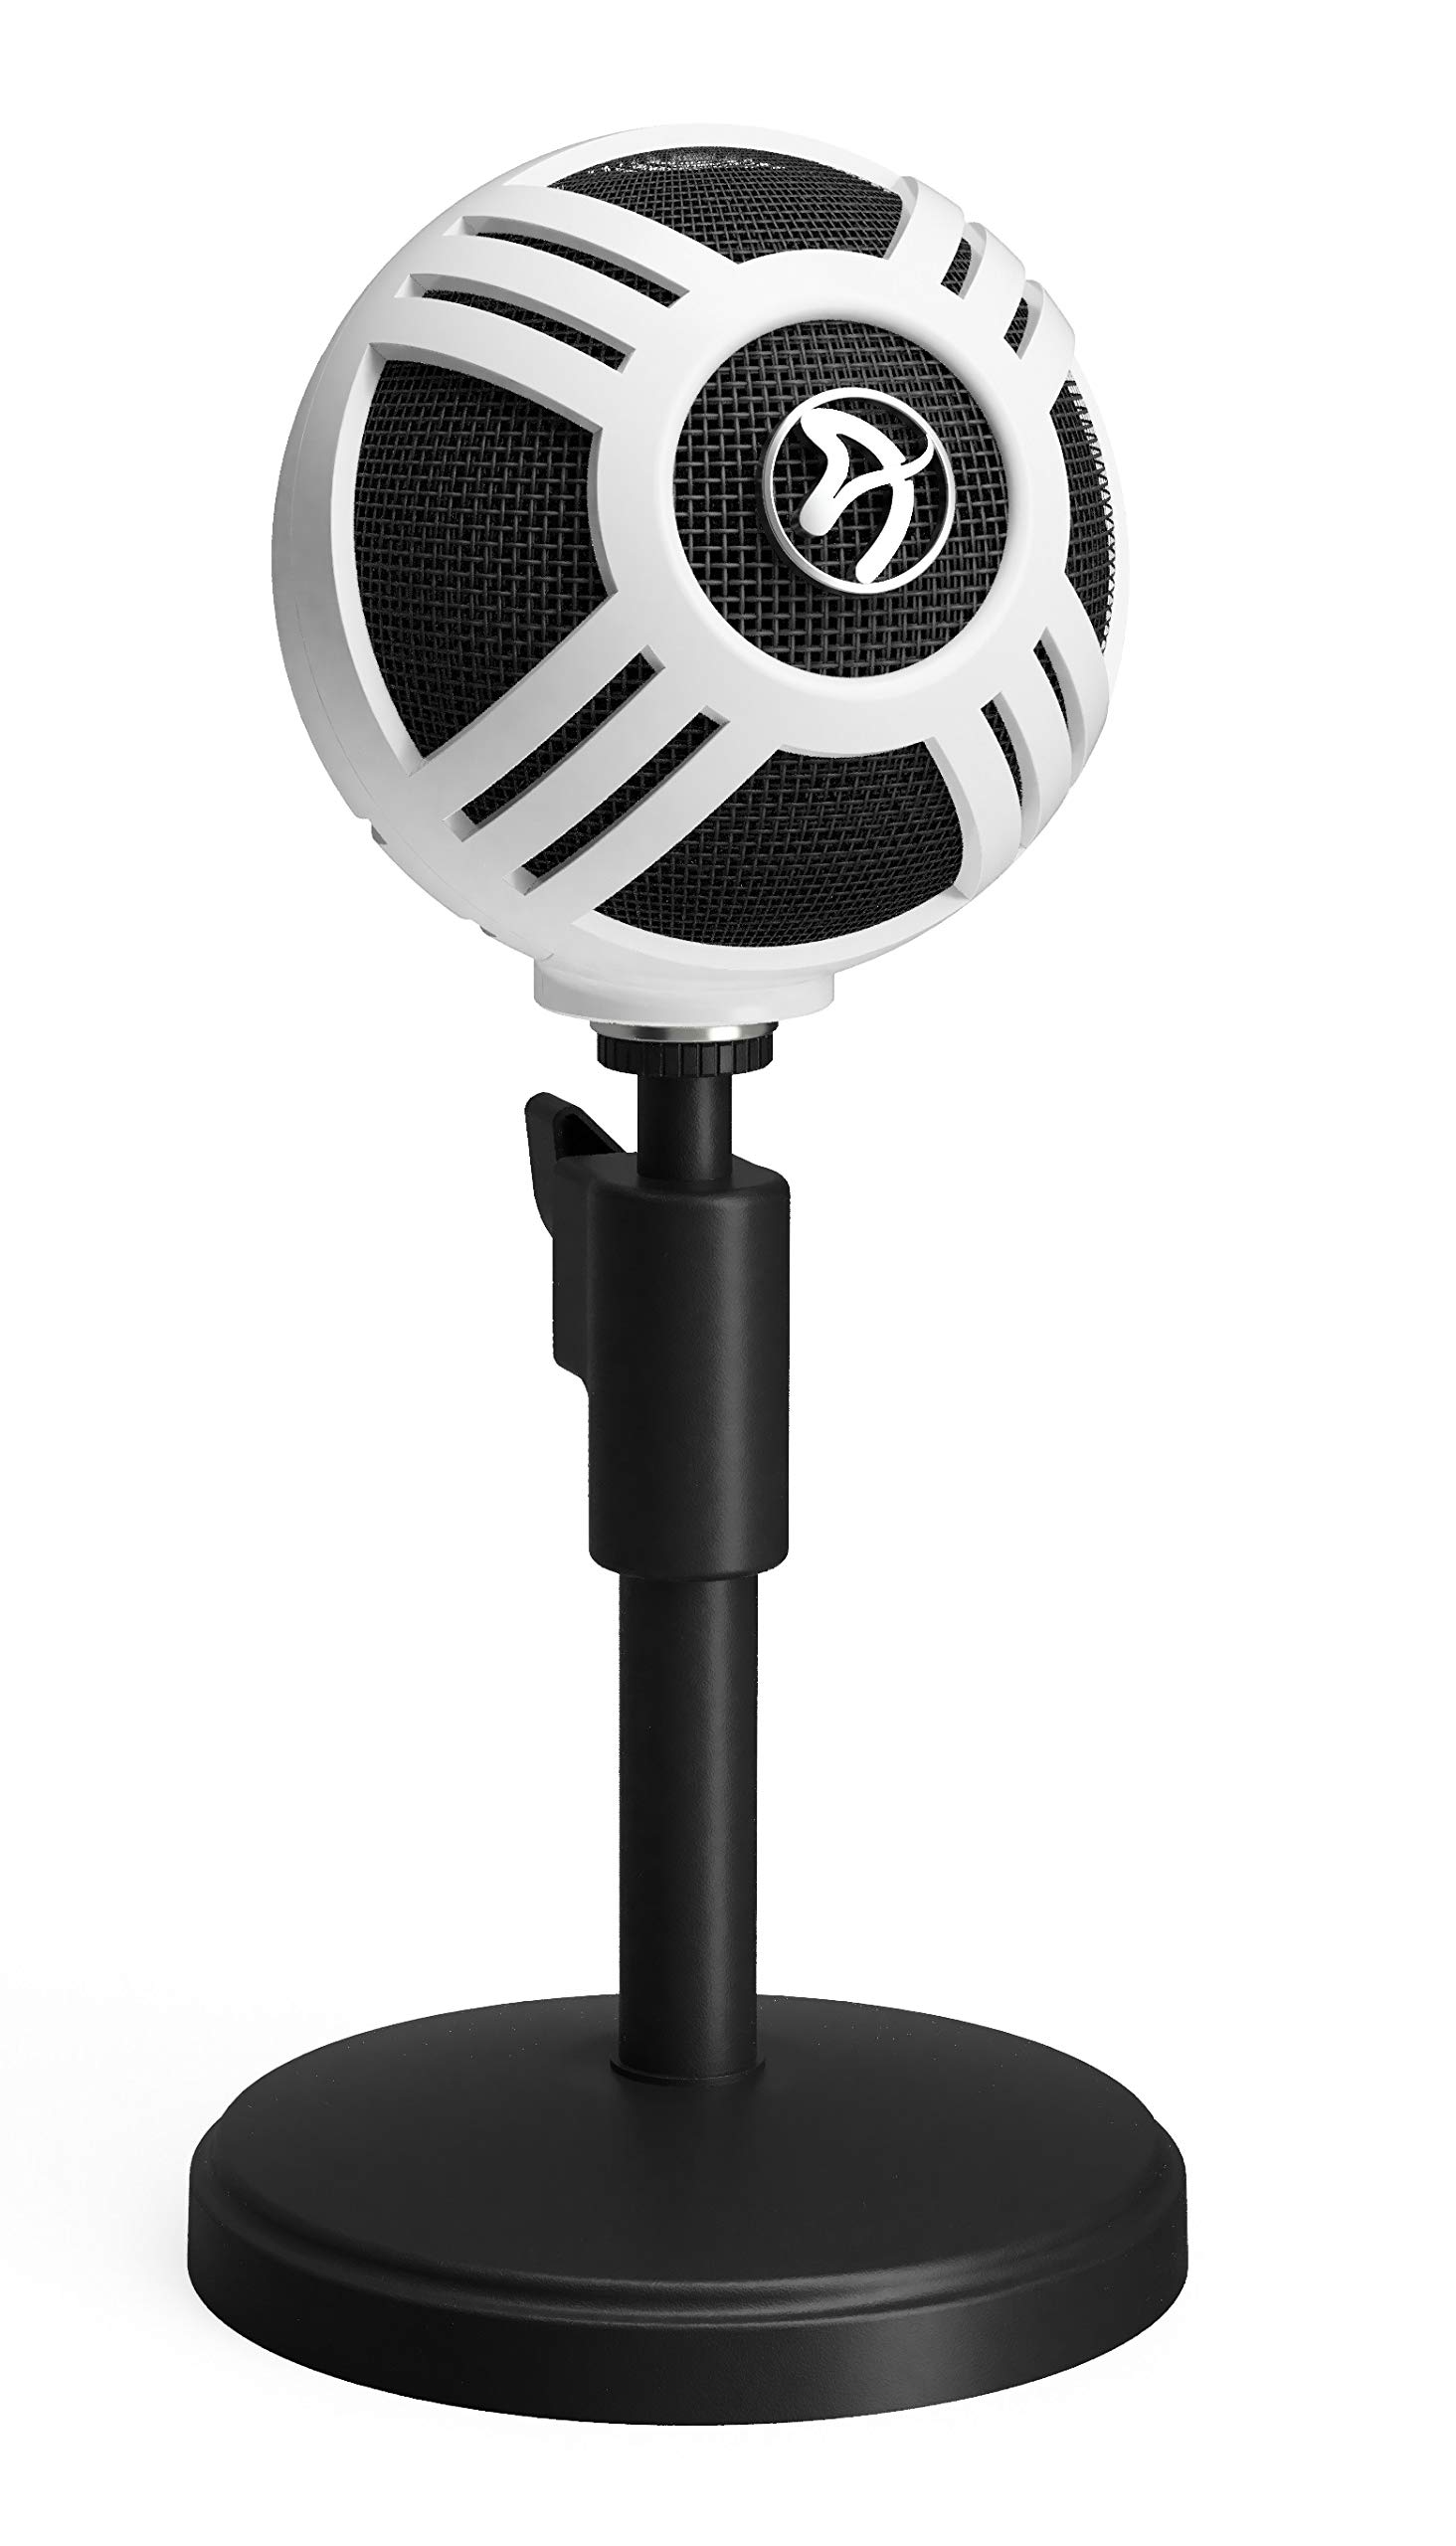 Arozzi Sfera Gaming/Streaming/Office USB Microphone - Cardioid Polar Pattern, Boom Arm Compatible - White